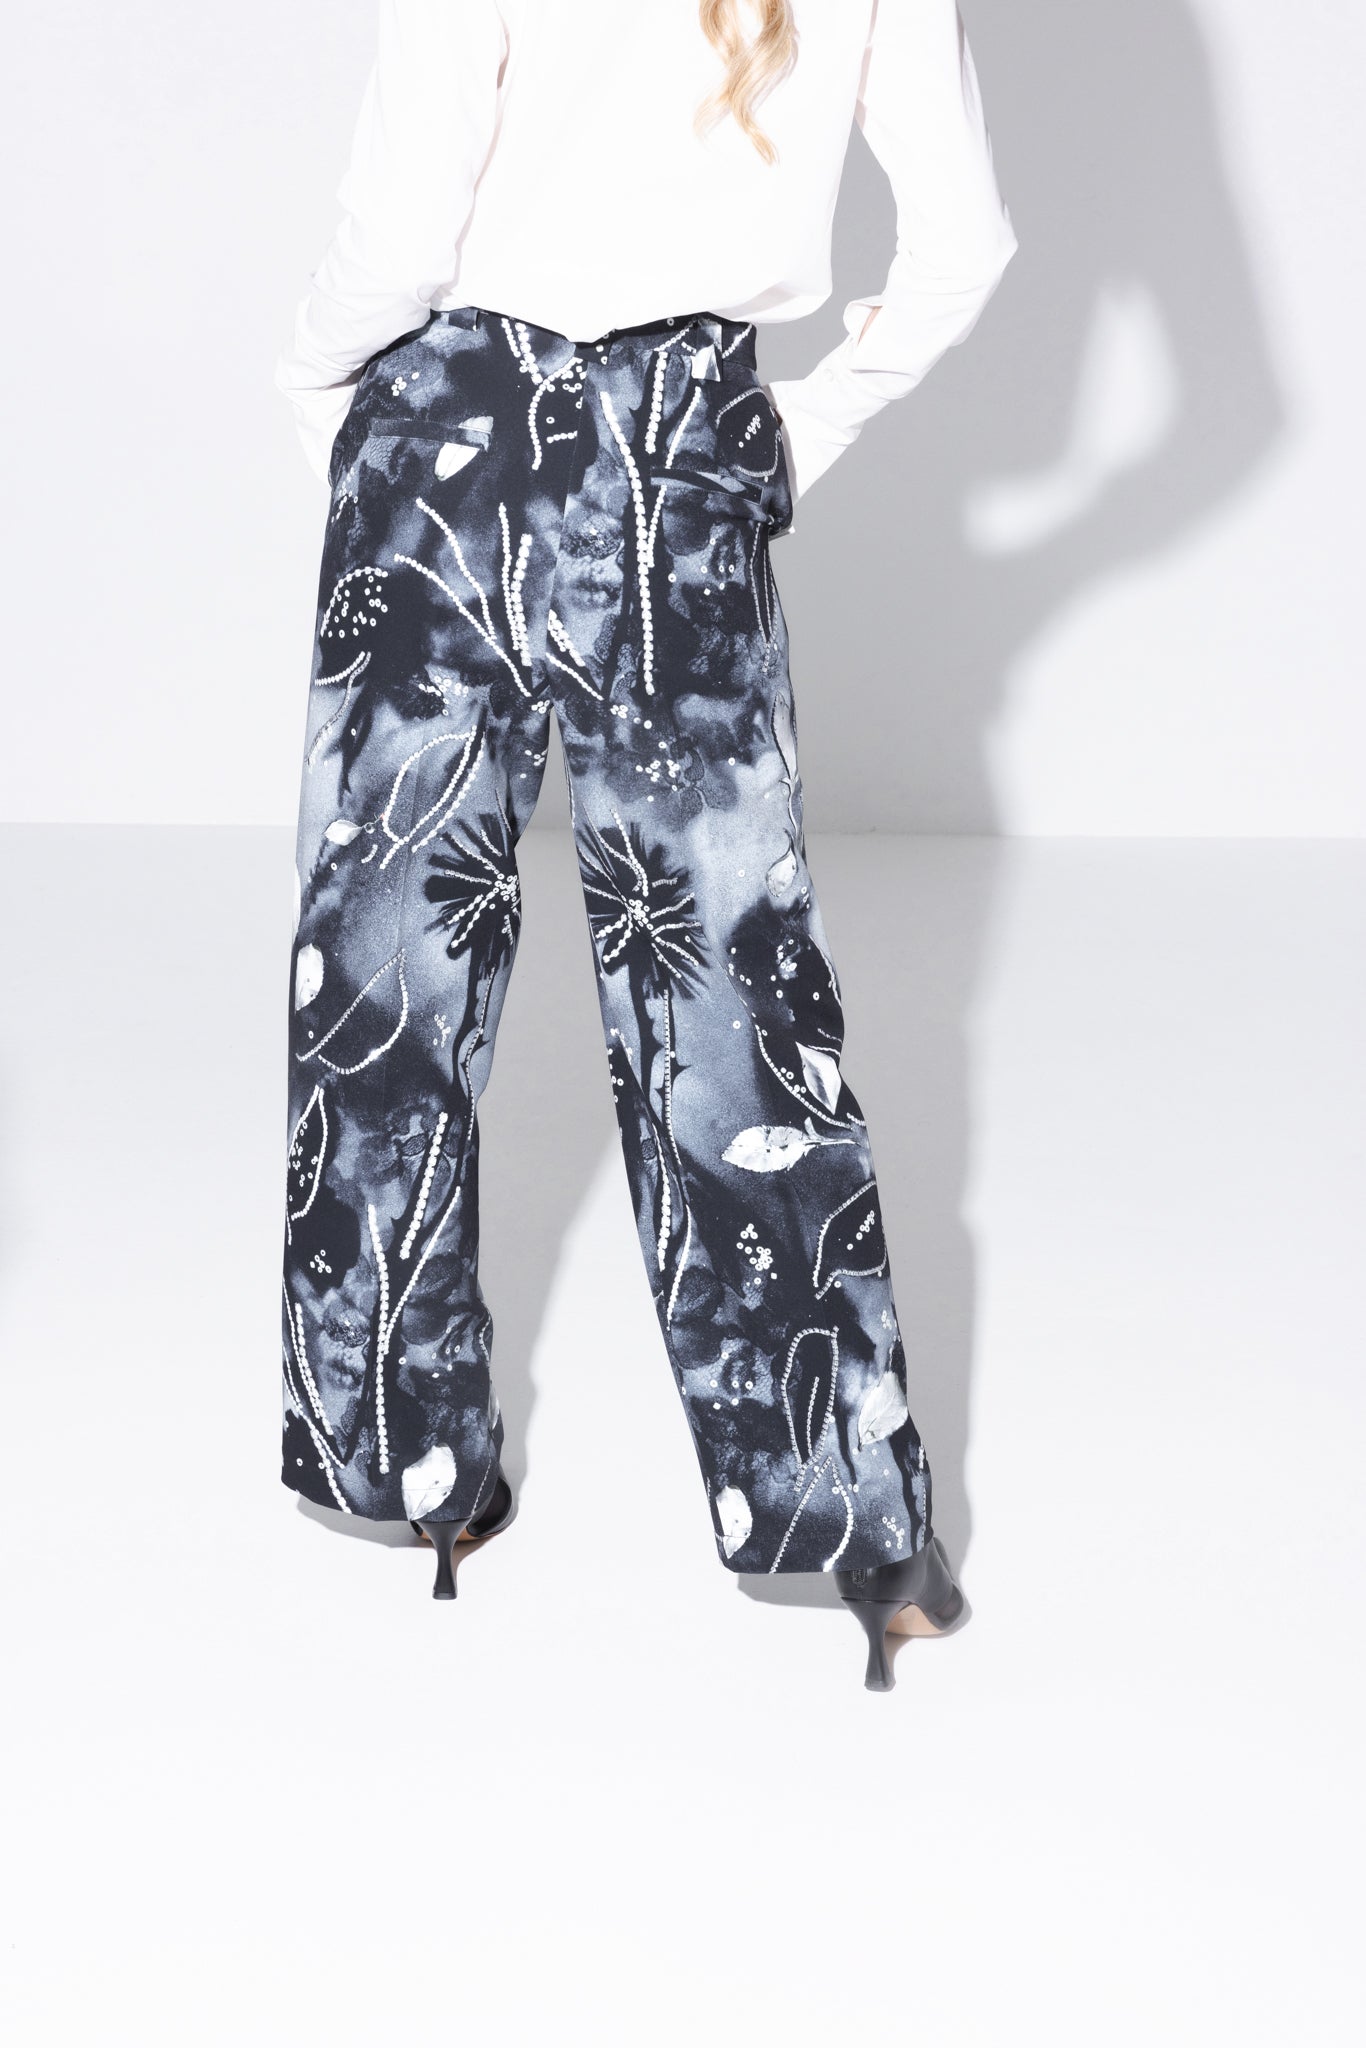 The Airbrush Lace Trousers